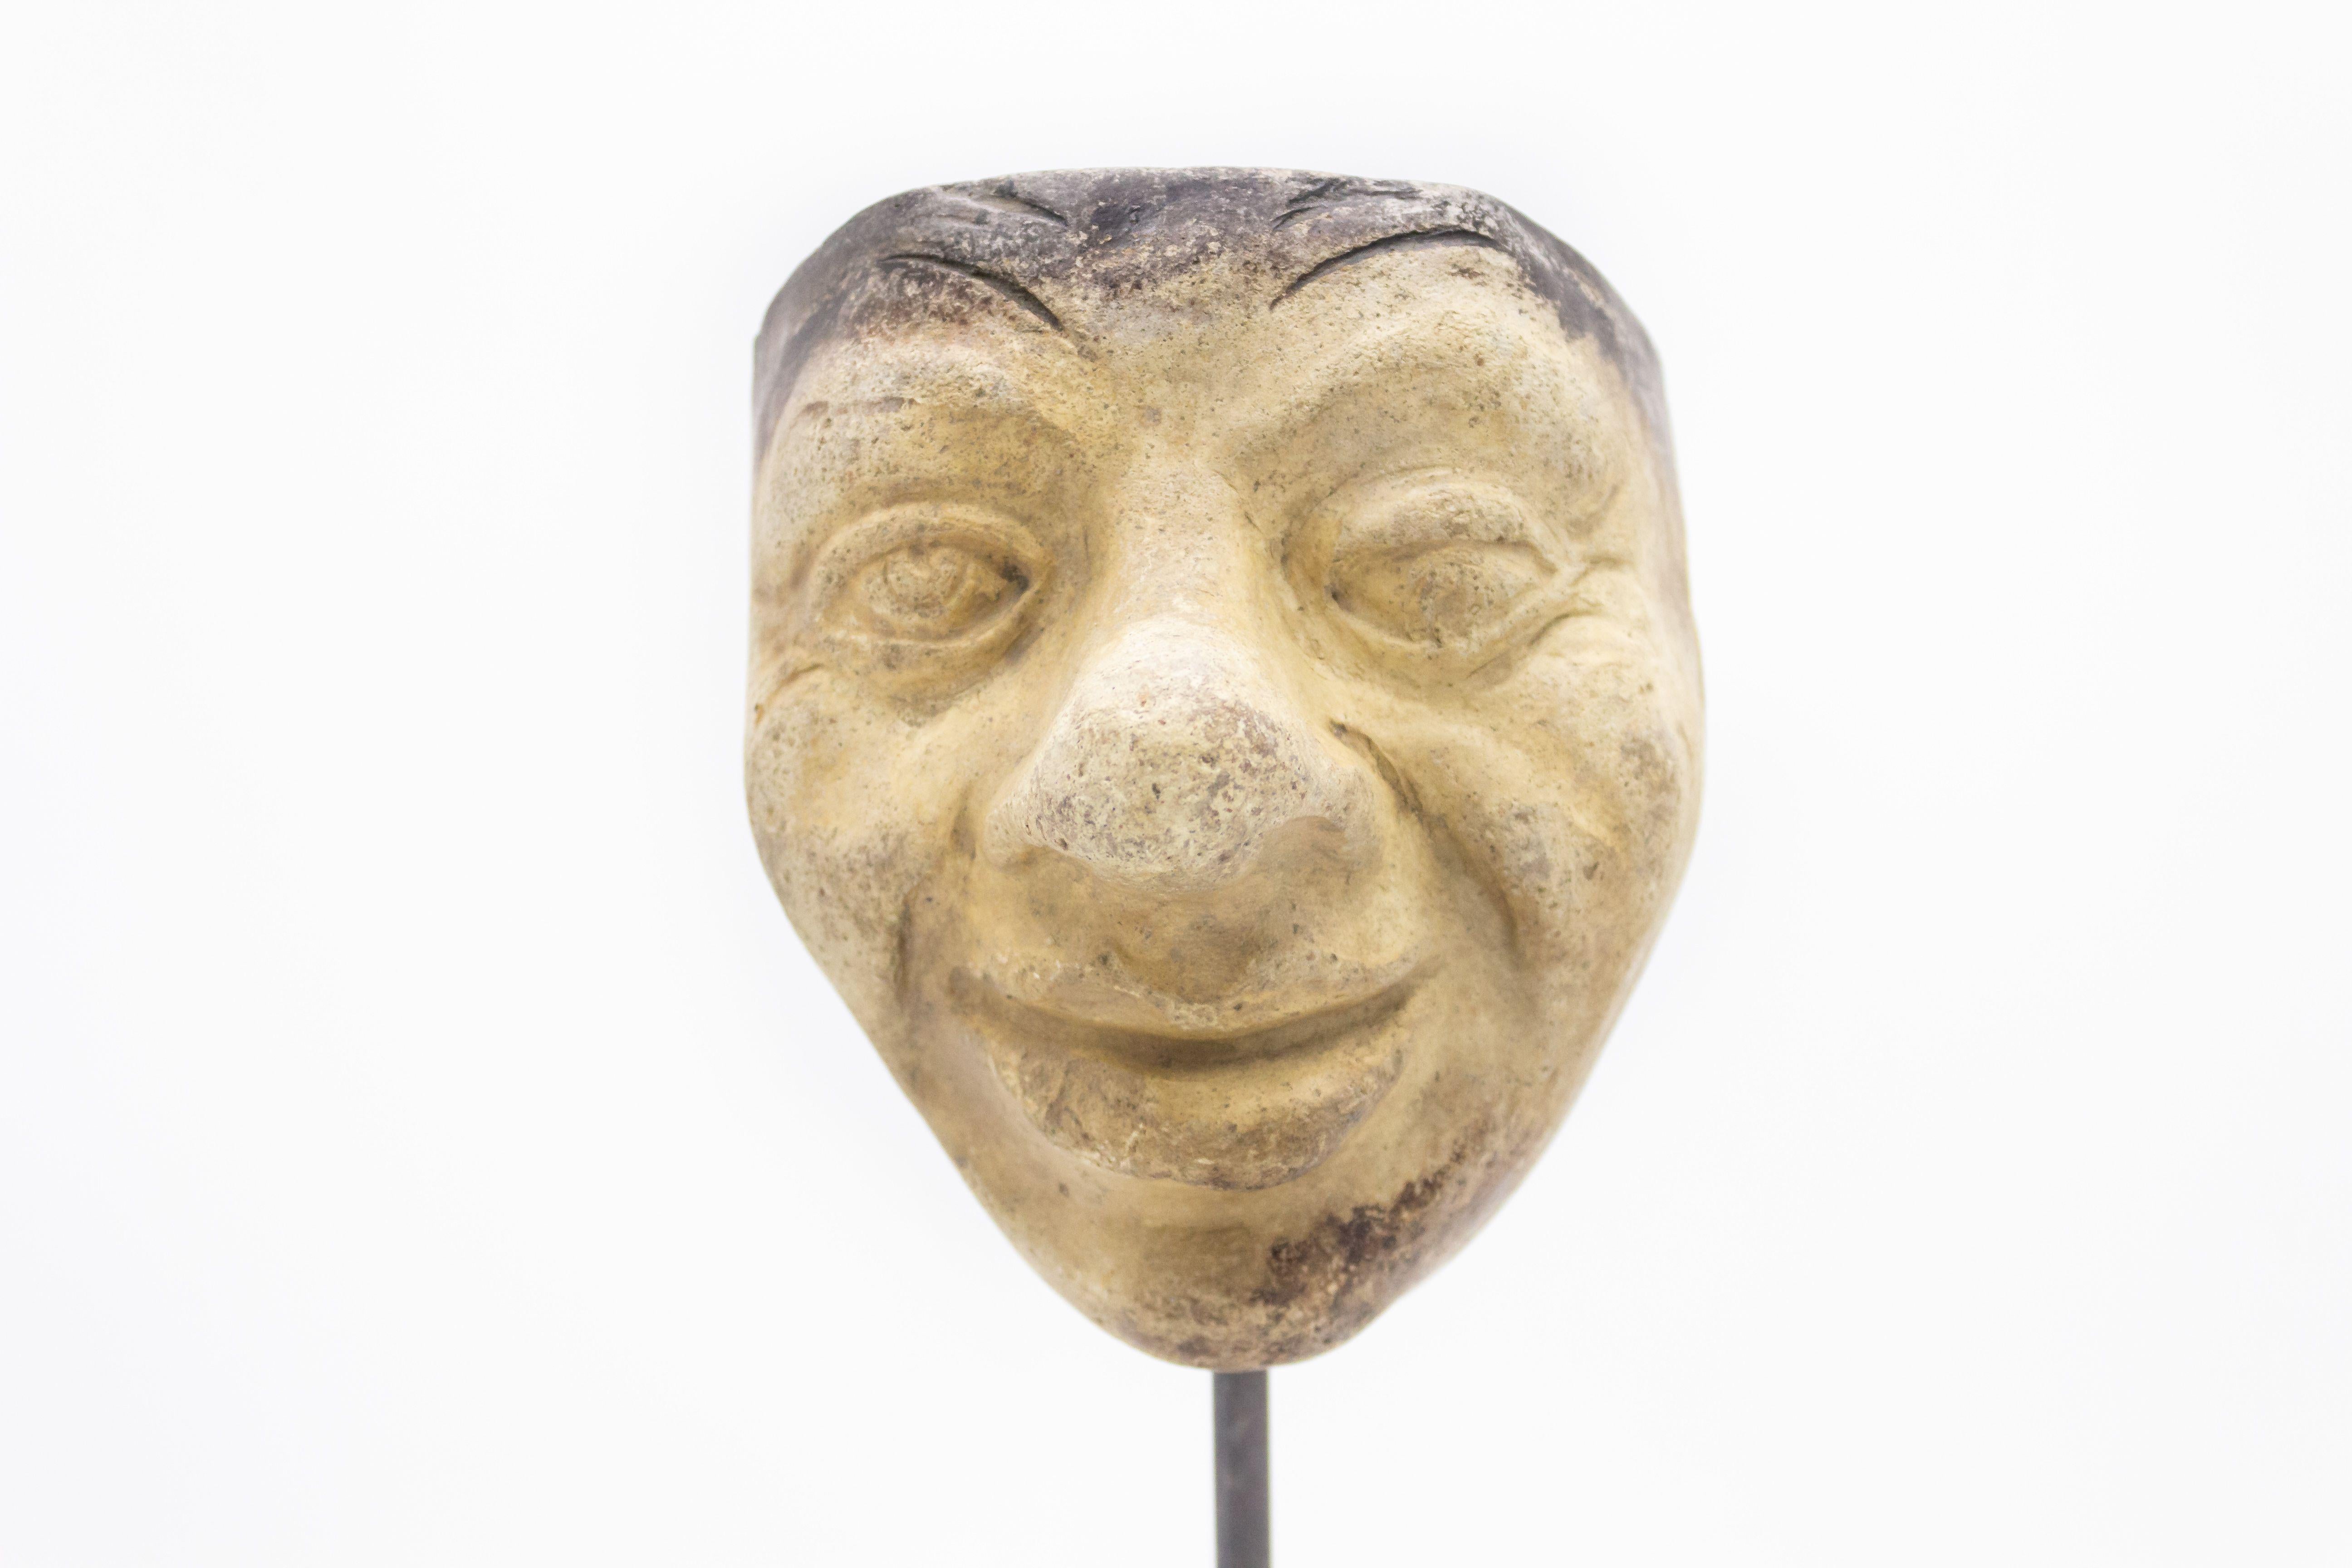 Continental German (late 19th Cent) sculpted terra-cotta master mask mold of a smiling Grotesque face with a bulbous nose displayed on a square black marble base stand (part of a 39 piece collection).
 